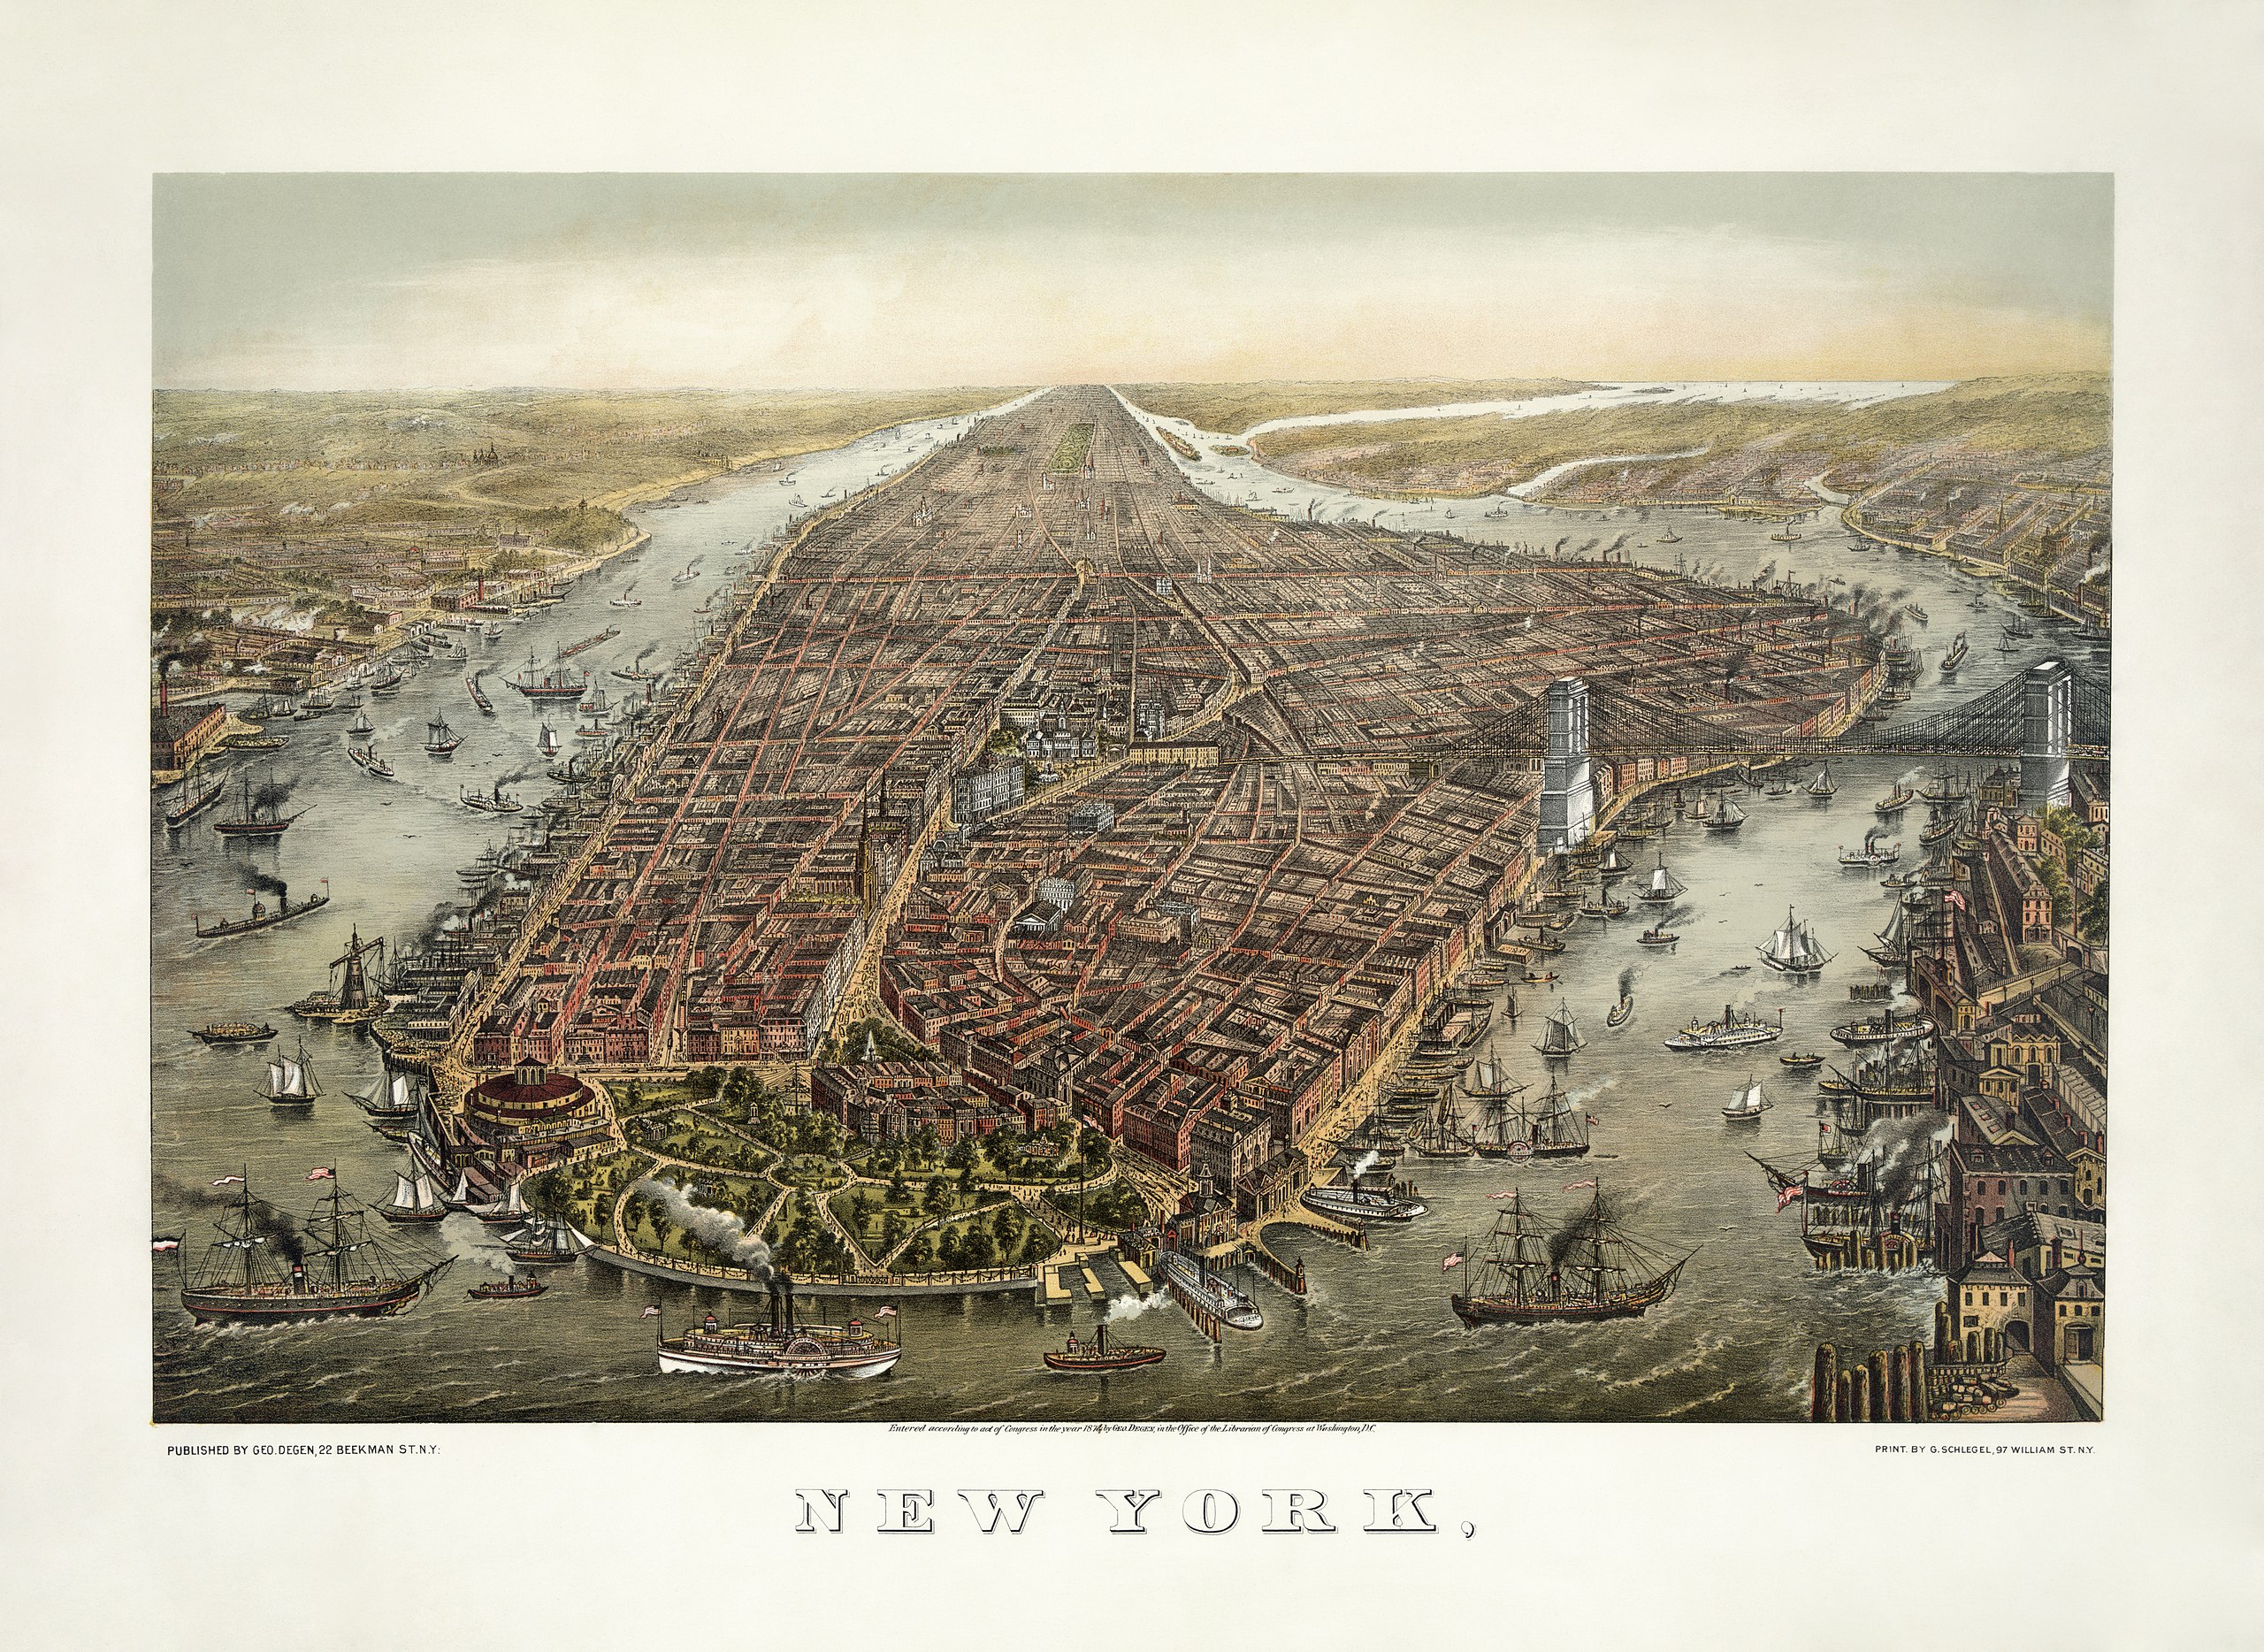 Manhattan in 1873, looking north. The Hudson River is at left. The Brooklyn Bridge across the East River (at right) was built from 1870 to 1883.